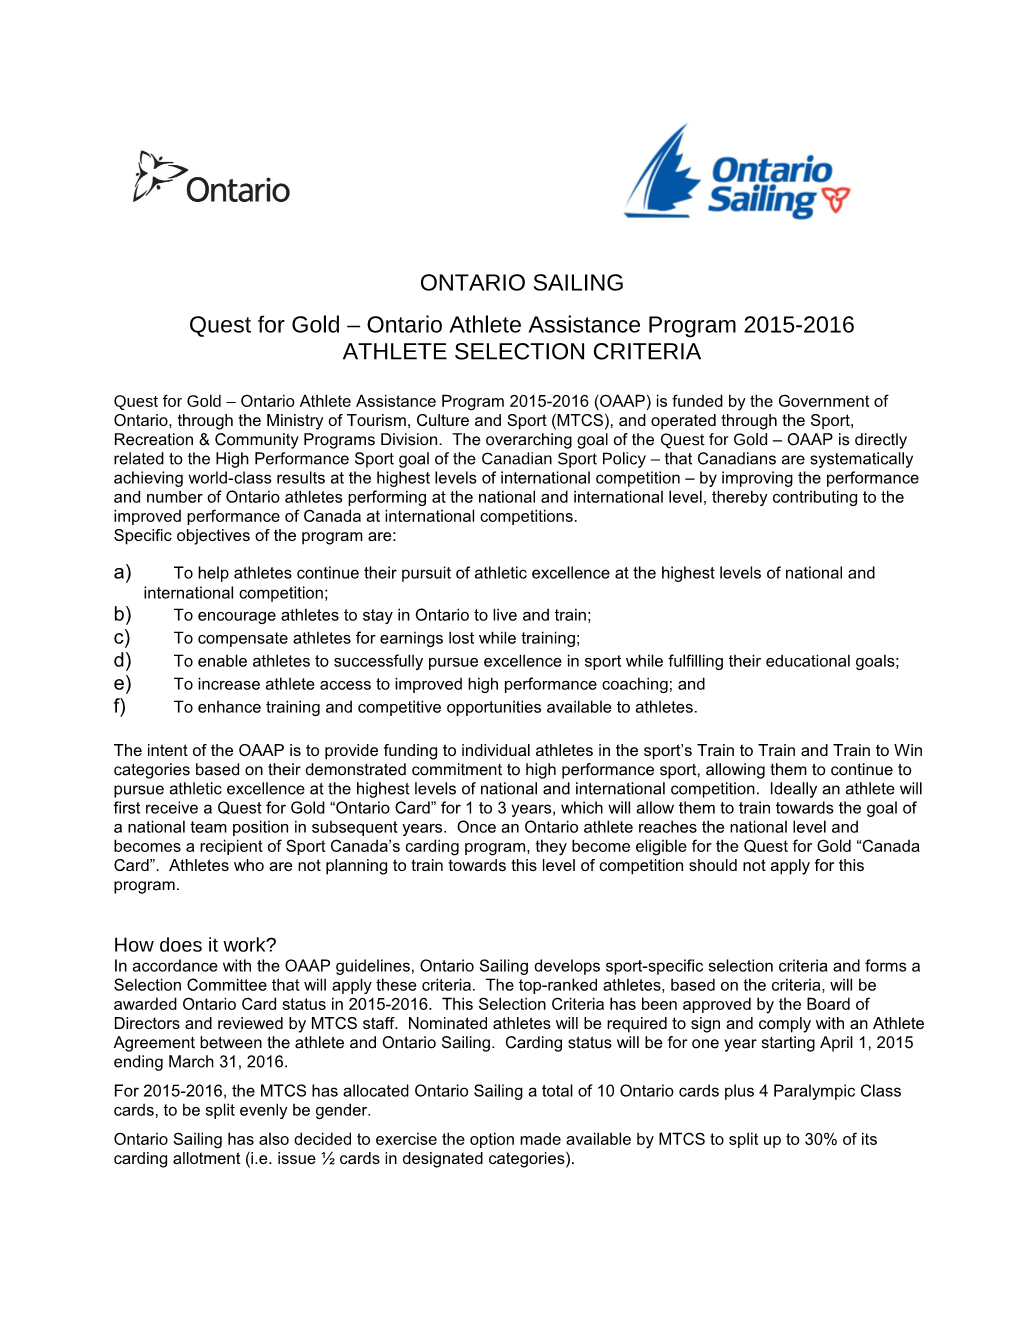 Quest for Gold Ontario Athlete Assistance Program 2015-2016